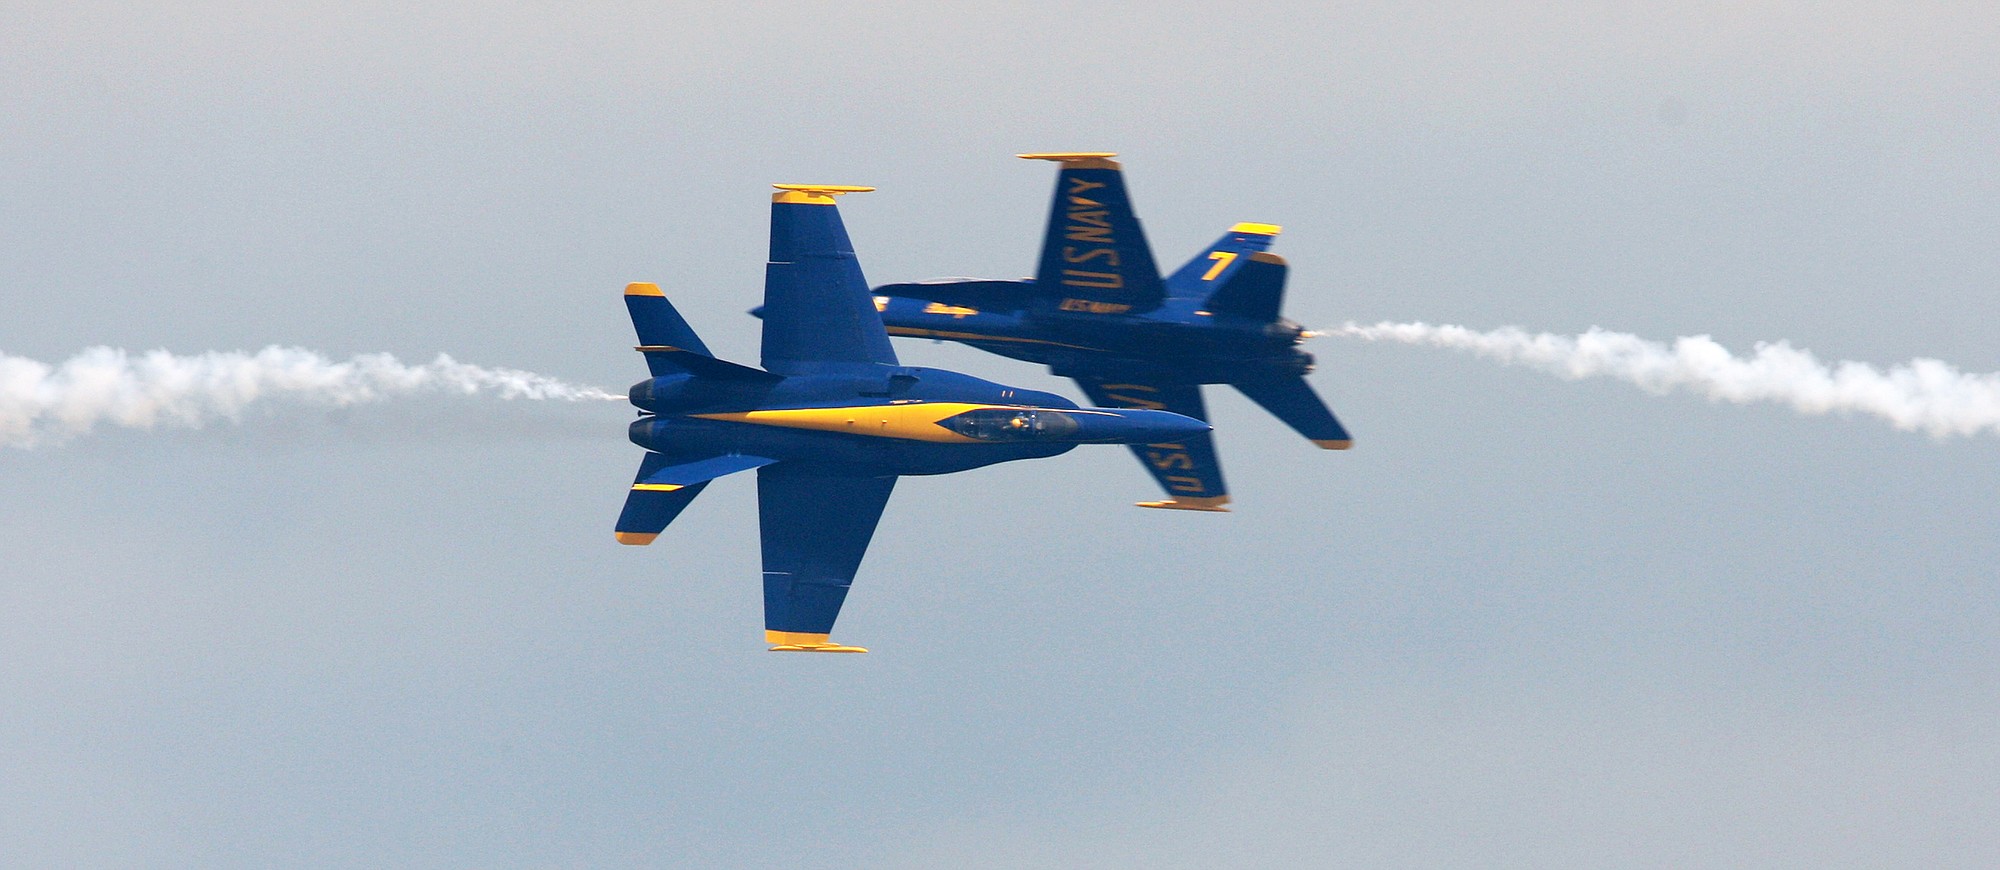 Associated Press files
The U.S. Navy Blue Angels will perform during the Oregon International Airshow in Hillsboro, Ore.